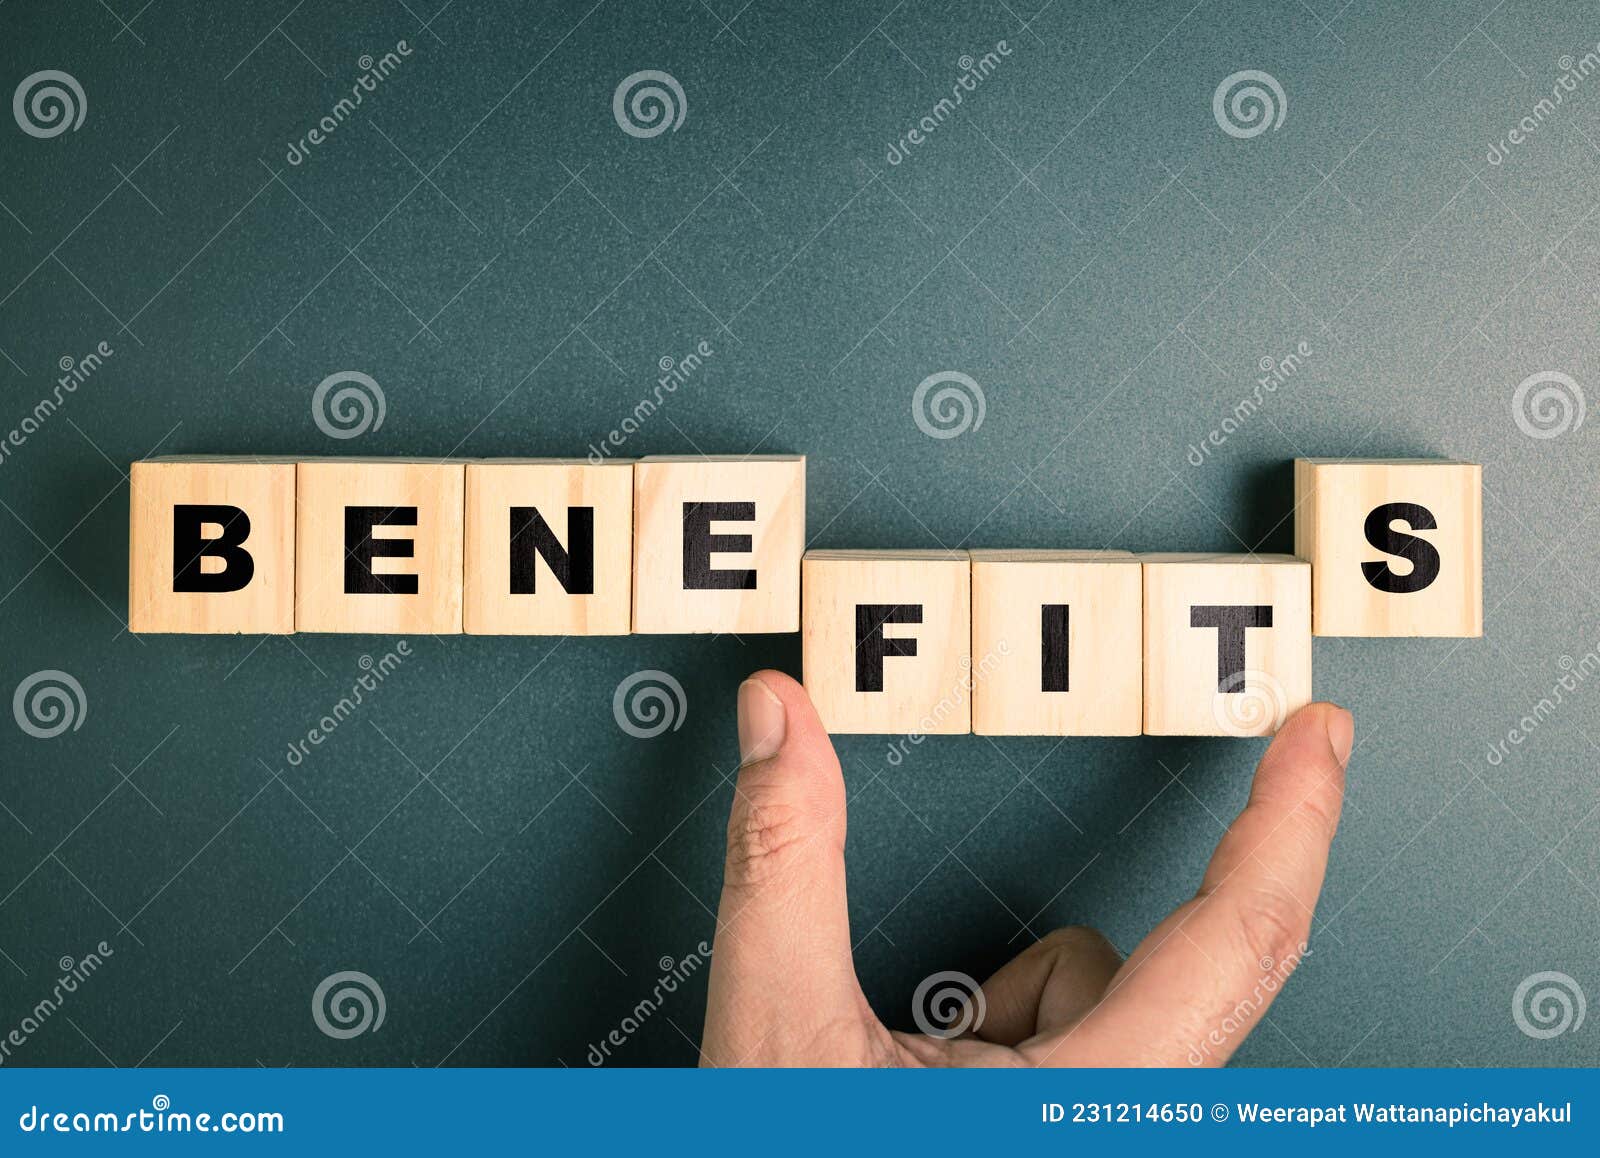 complete the word benefits, converge benefits, mutal benefits